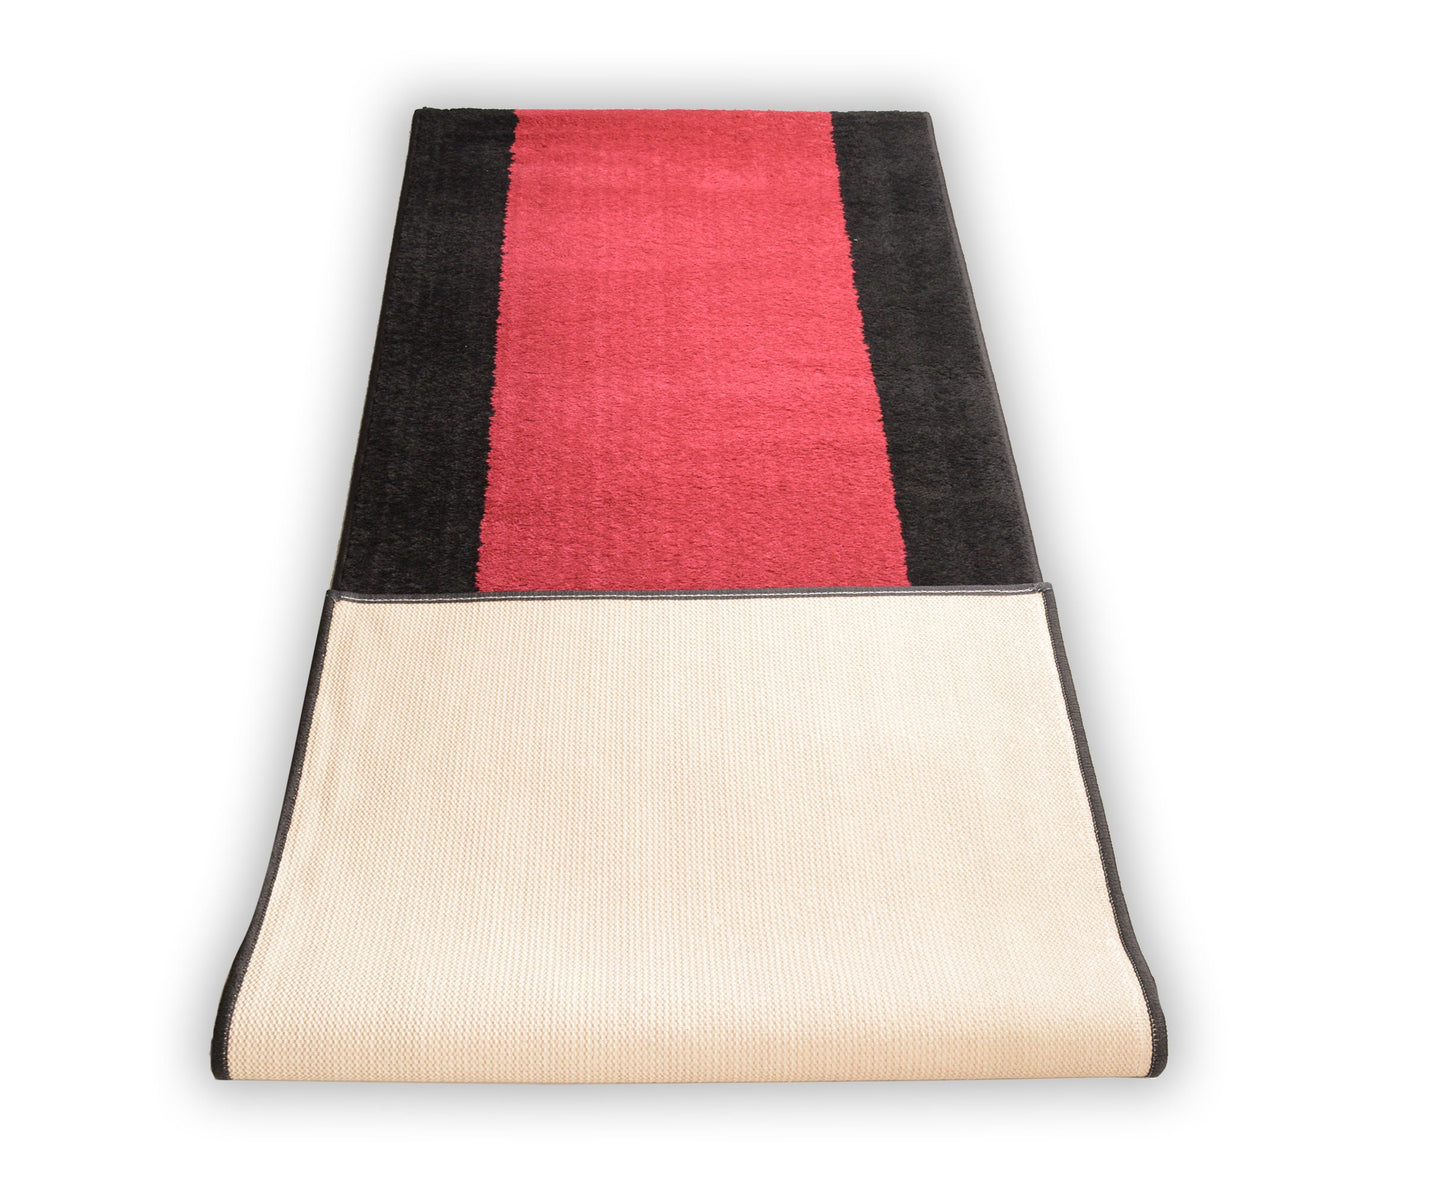 Custom Size Runner Rug Red with Black Bordered 25" Width Choice of Your Length Cut to Size by Feet Skid Slip Resistant Customize Rug Runner